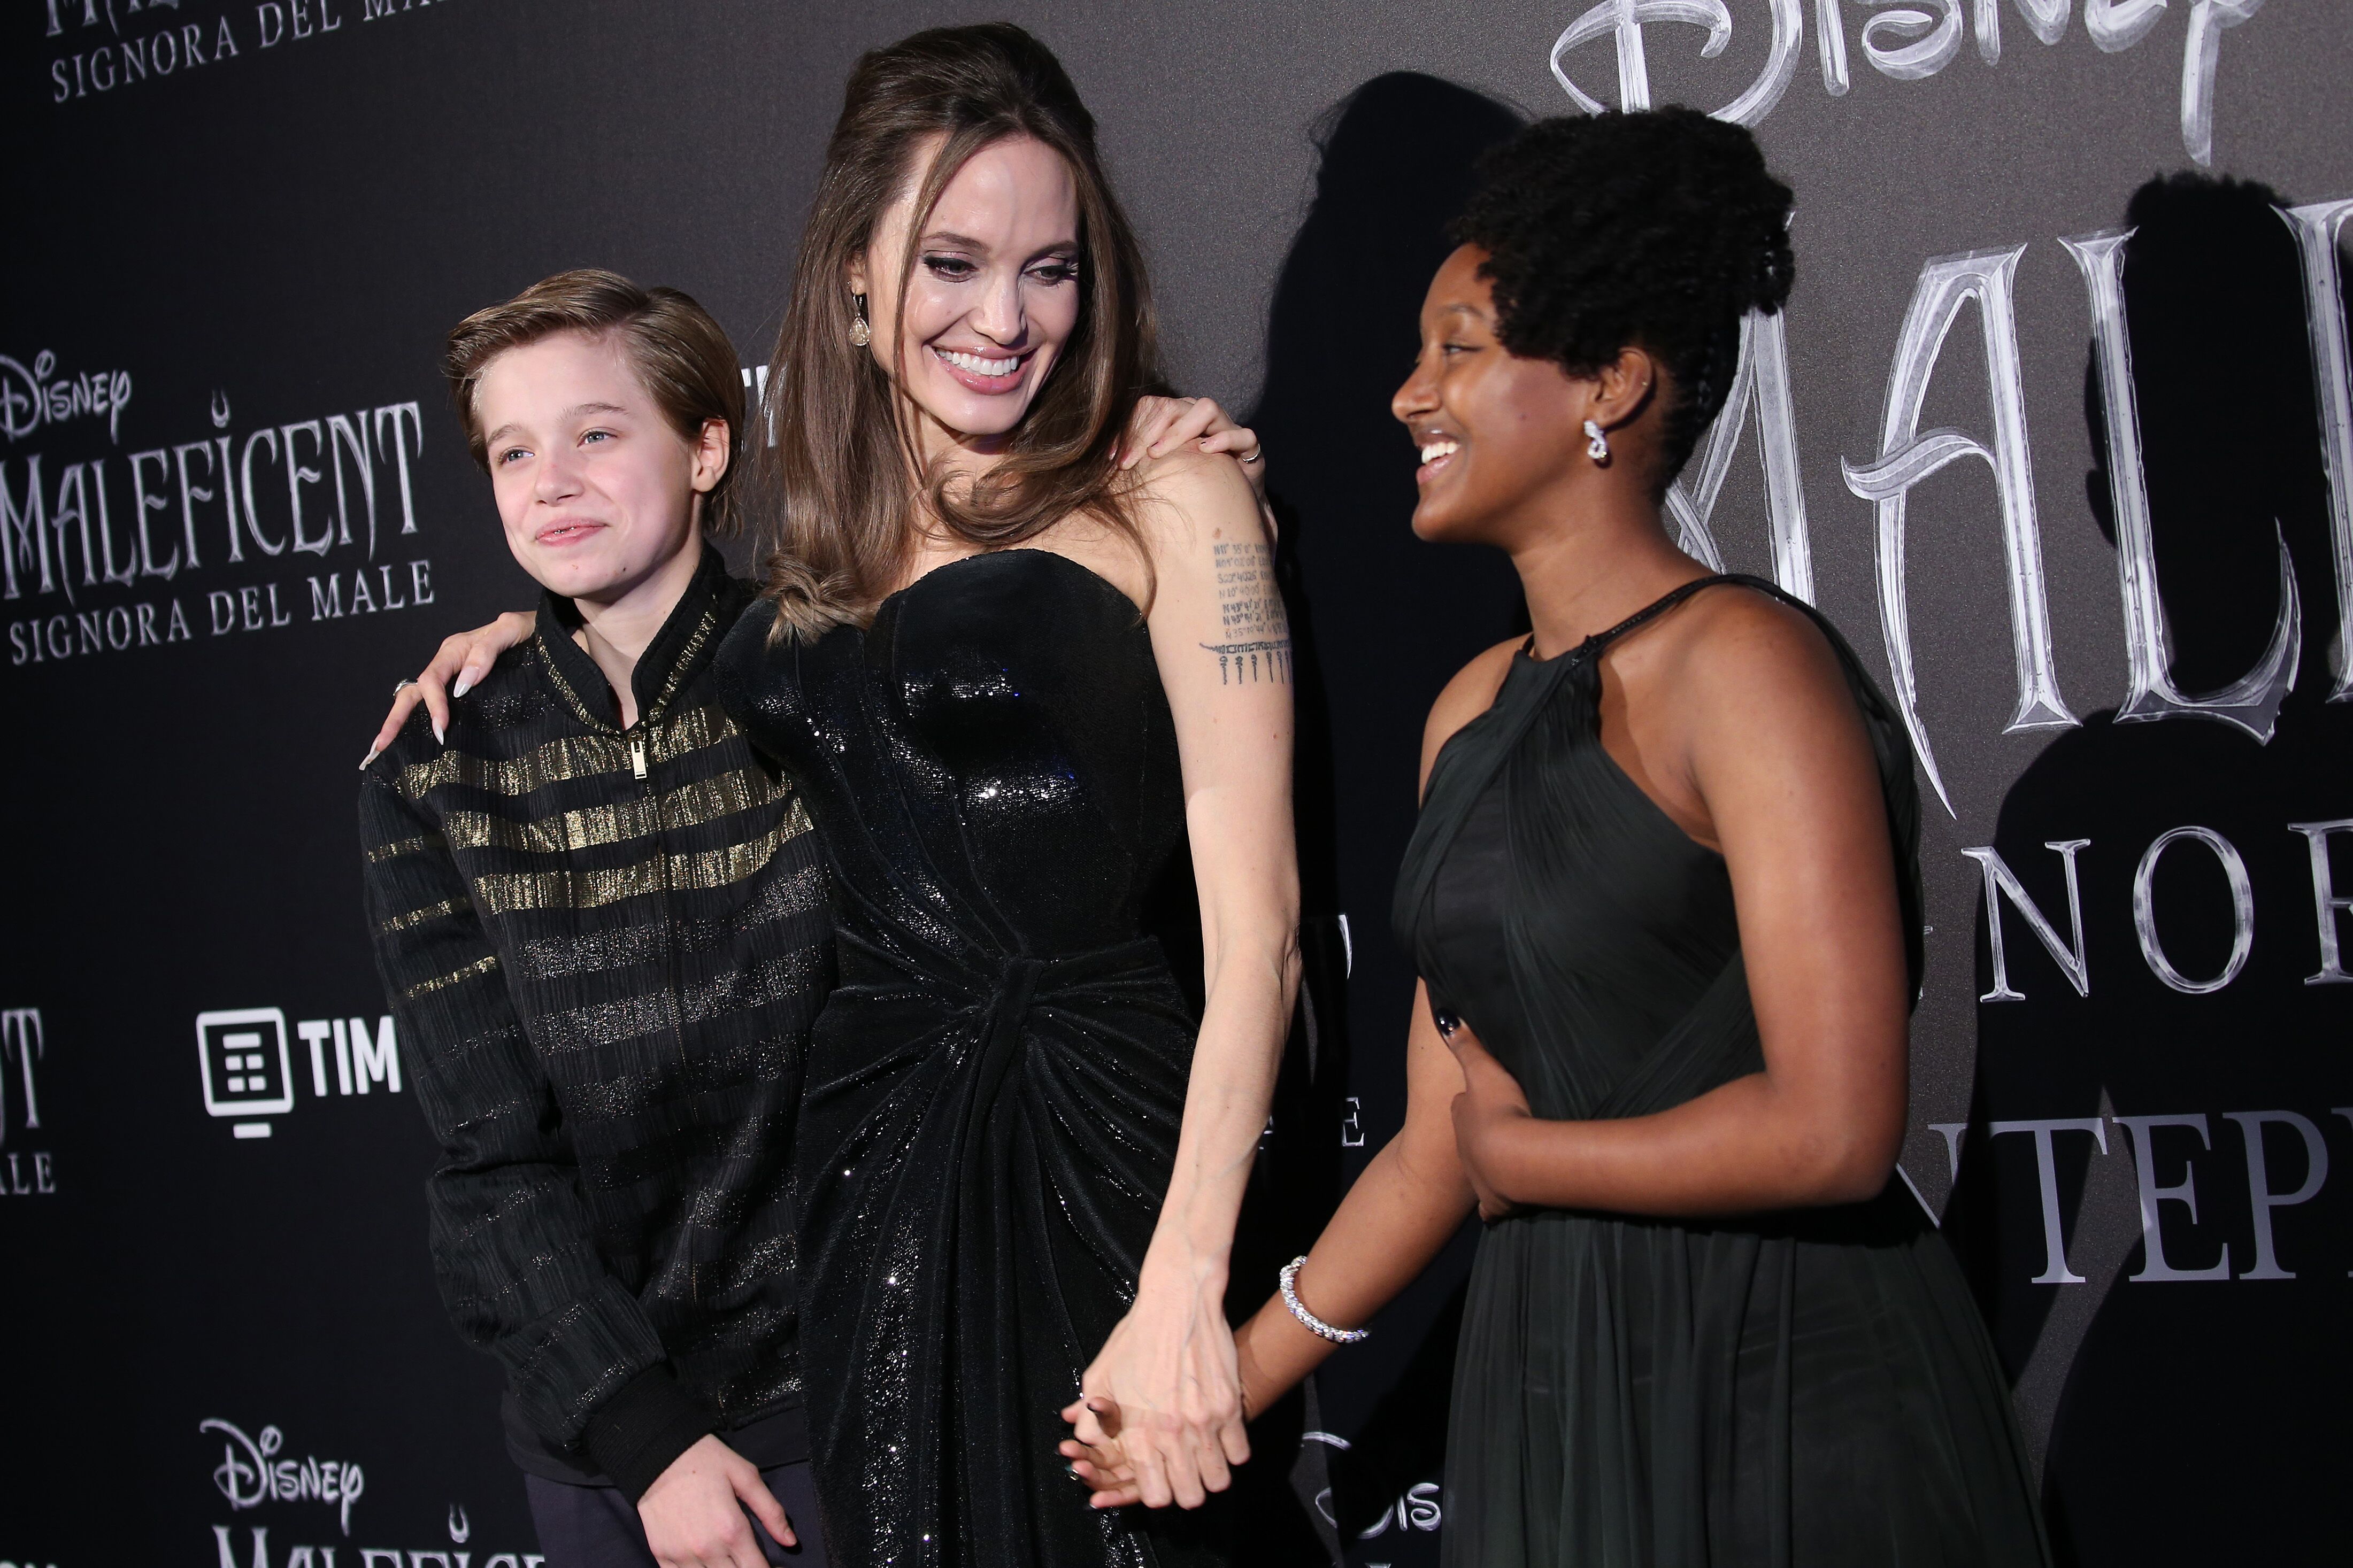 Angelina Jolie and her children Shiloh and Zahara at the "Maleficent: Mistress of Evil" premiere | Source: Getty Images/GlobalImagesUkraine